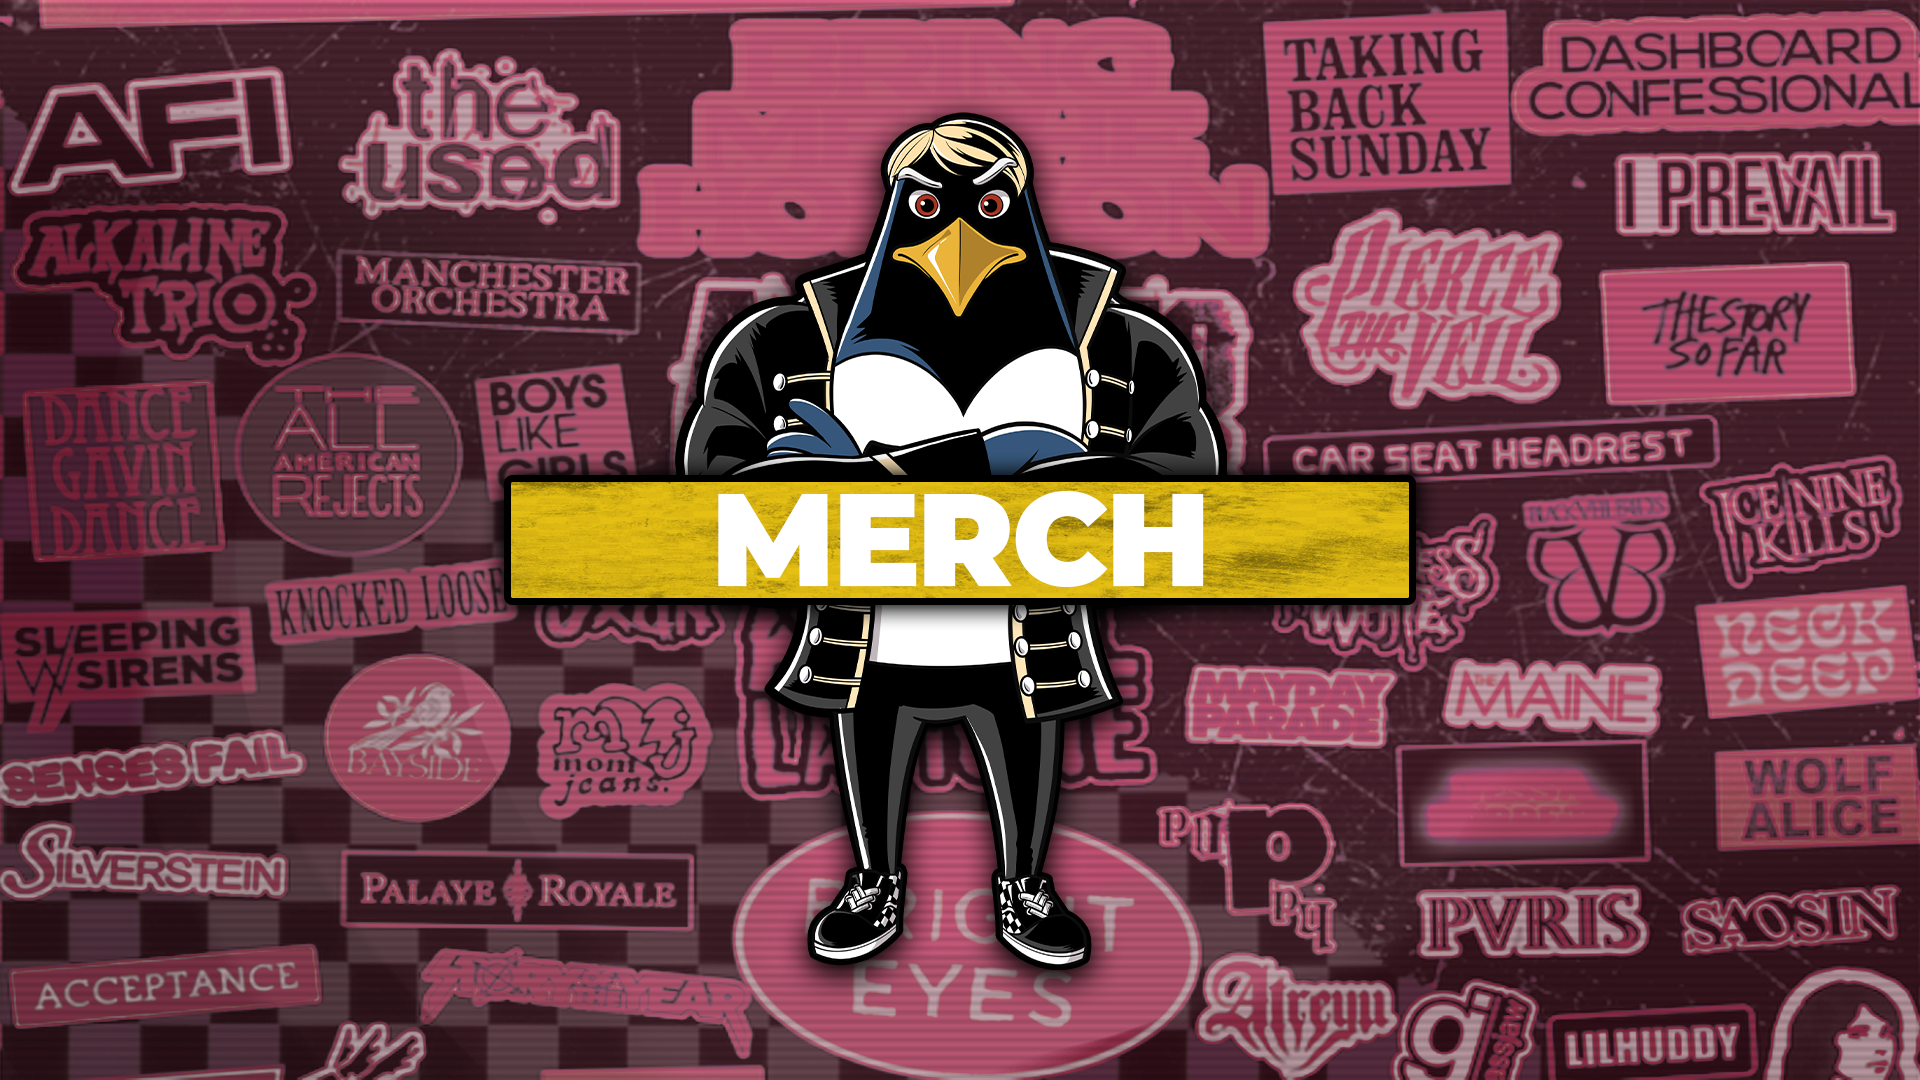 An engaging Emo Night 'MERCH' graphic featuring a cartoon penguin dressed in black punk rock attire, set against a backdrop displaying neon signs of famous emo and punk bands such as AFI, The Used, and Dashboard Confessional. The bright yellow 'MERCH' text on the banner indicates merchandise available for fans, highlighting the commercial aspect of the emo music scene.